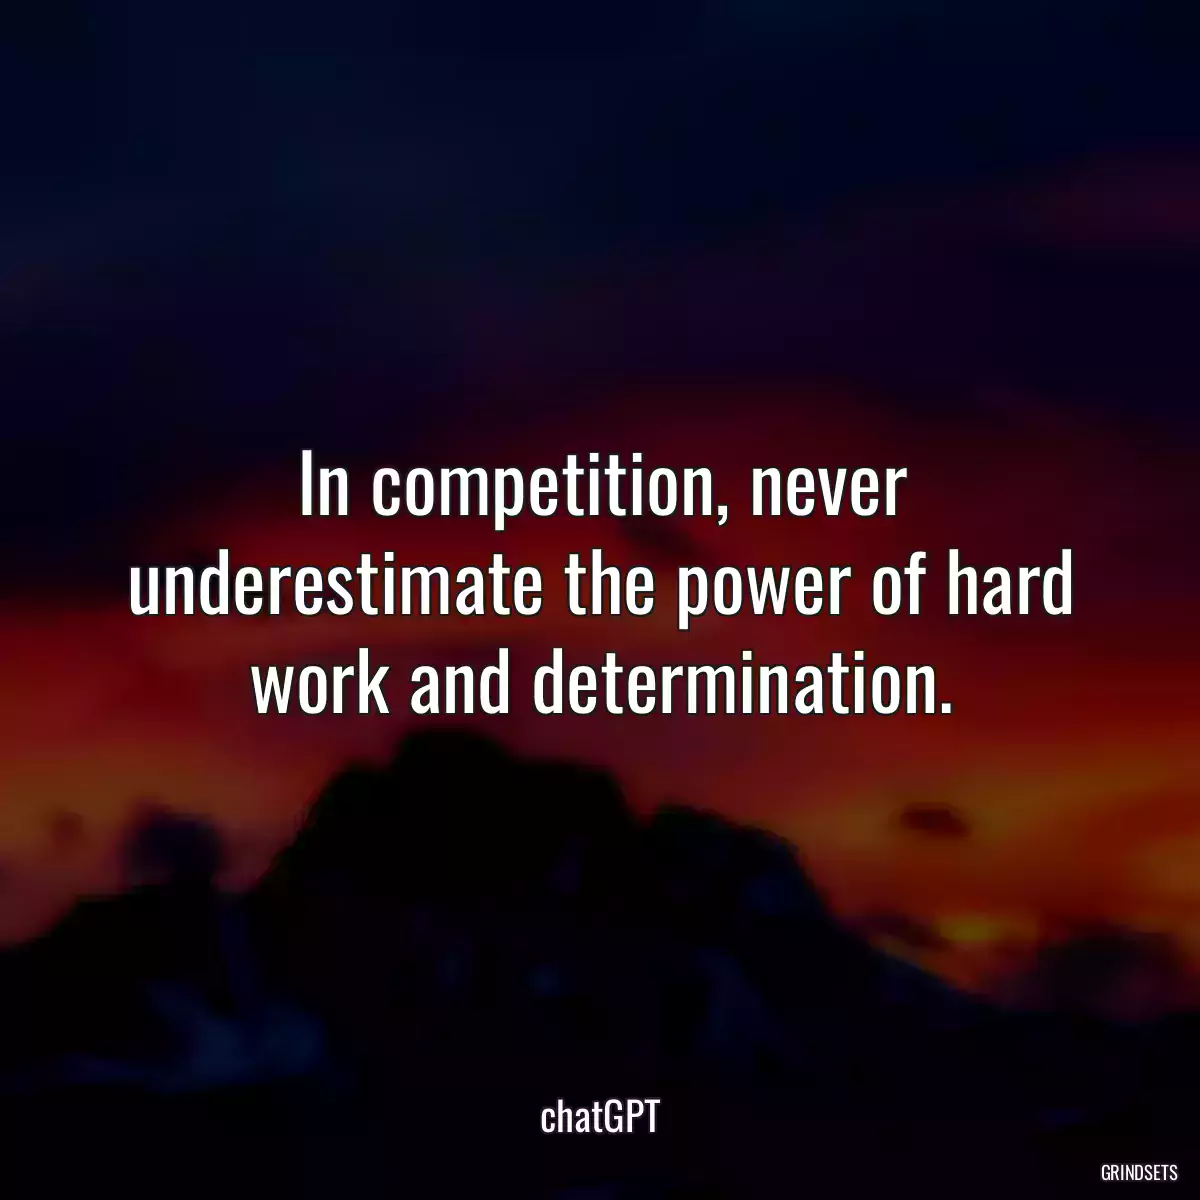 In competition, never underestimate the power of hard work and determination.